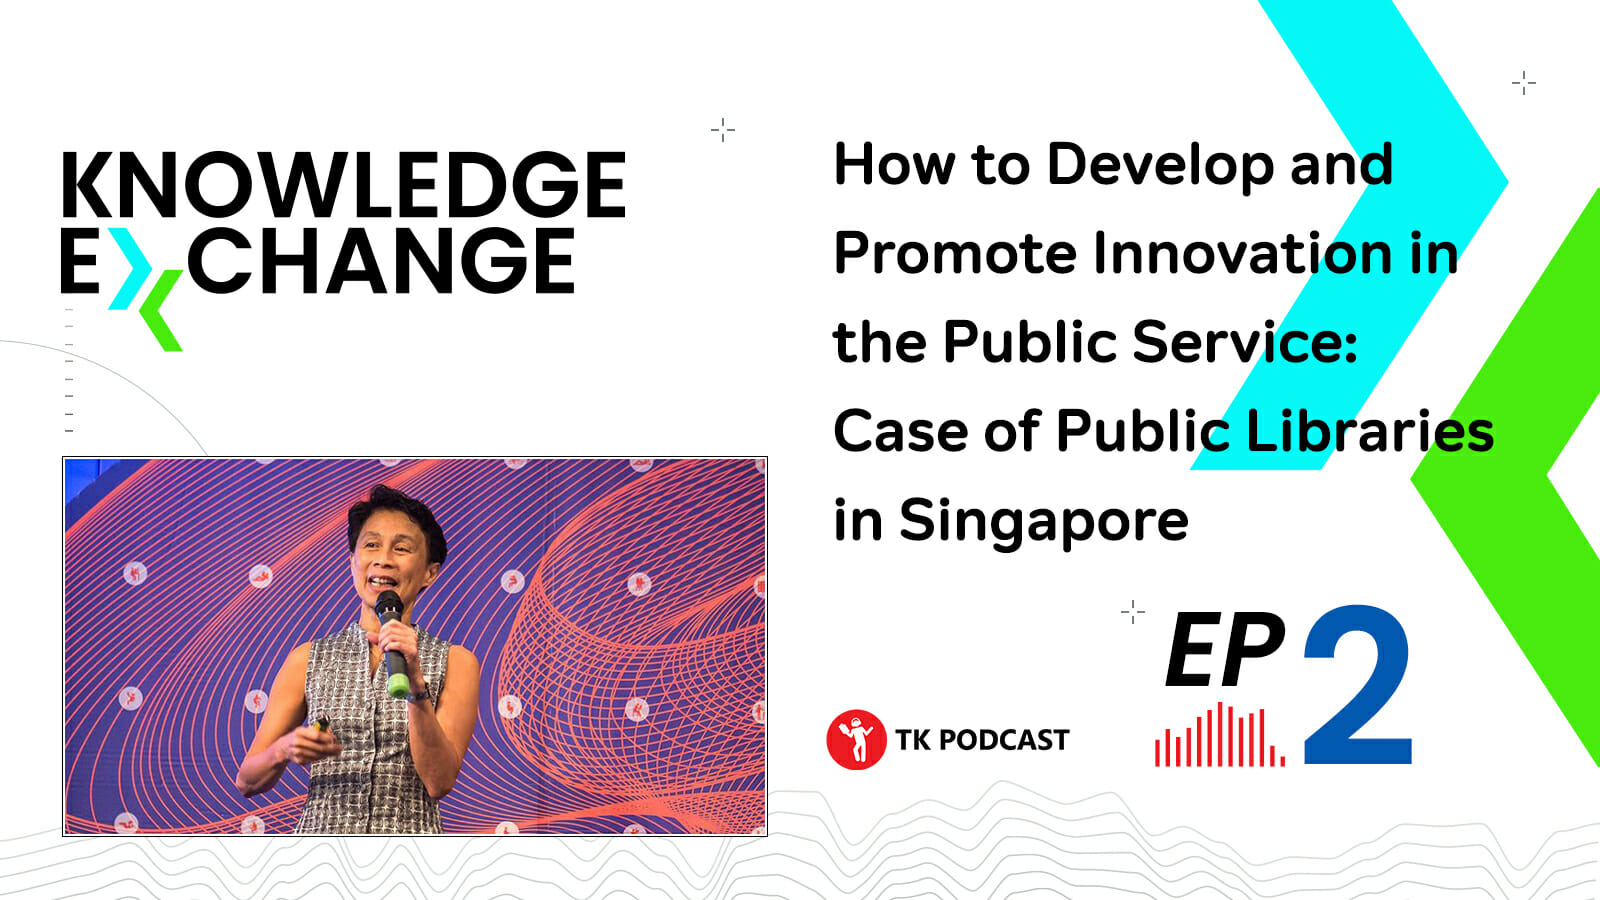 How to Develop and Promote Innovation in the Public Service: Case of Public Libraries in Singapore